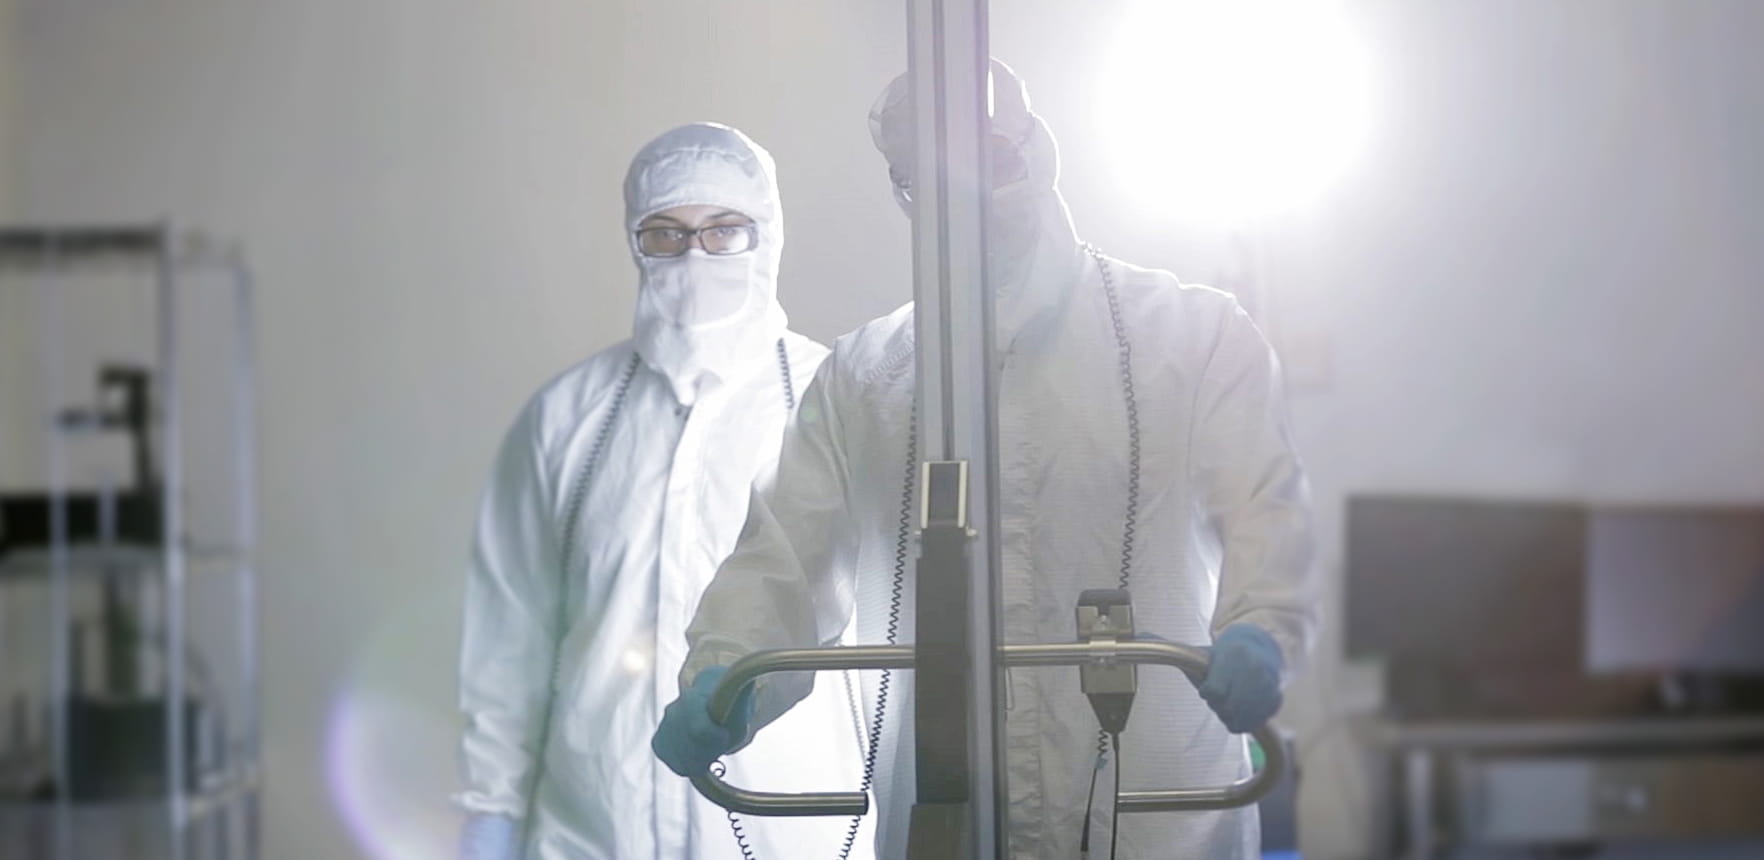 Employees in the clean room